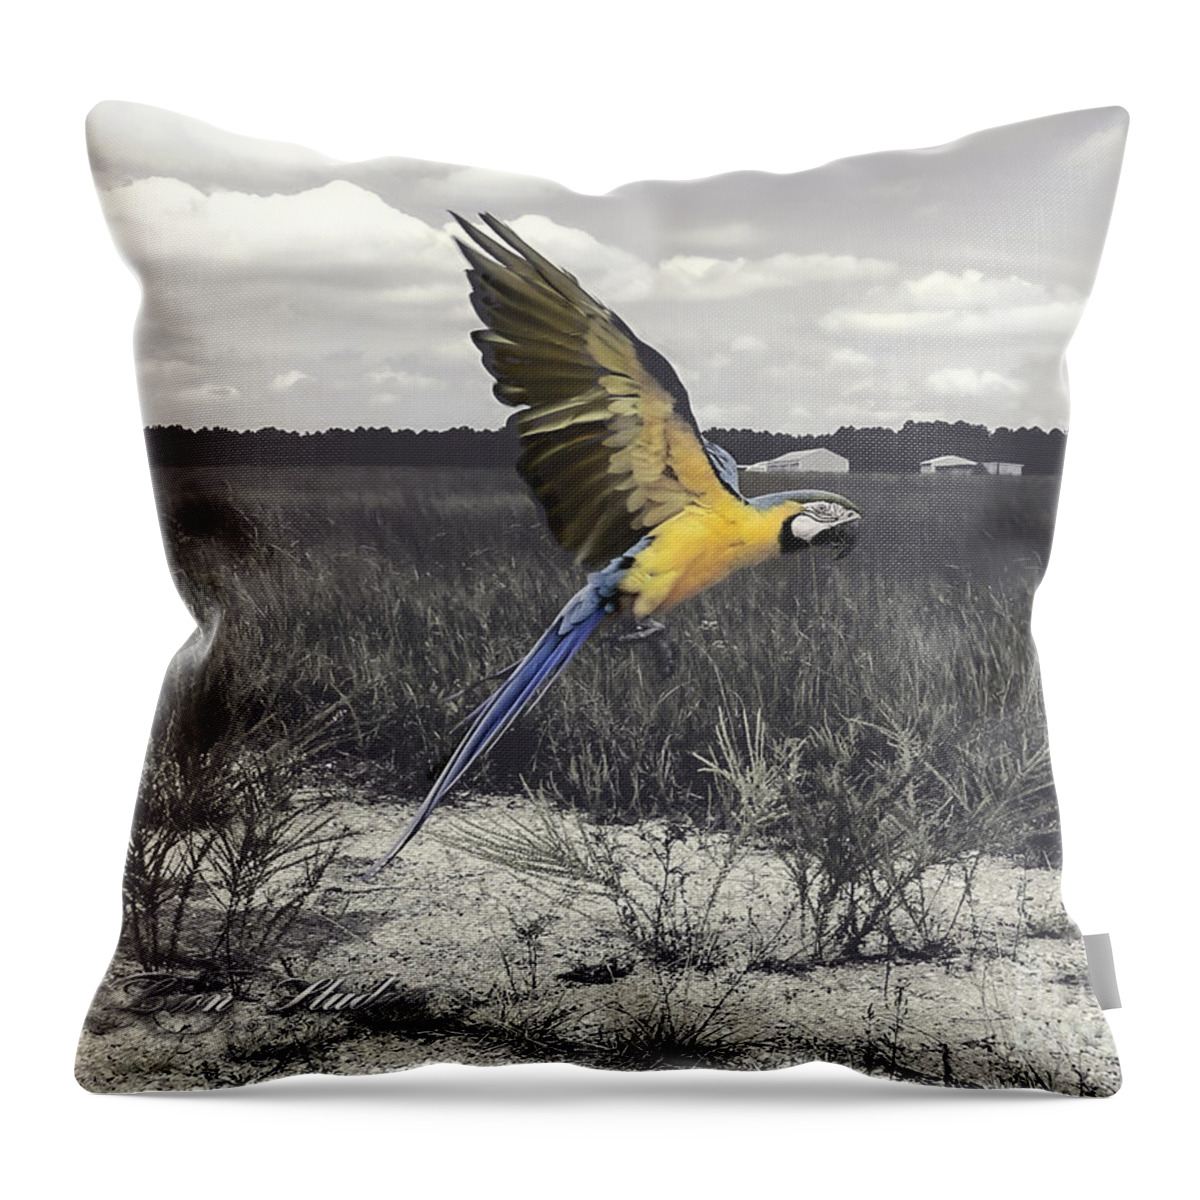 Photoshop Throw Pillow featuring the photograph Blue And Gold Macaw by Melissa Messick